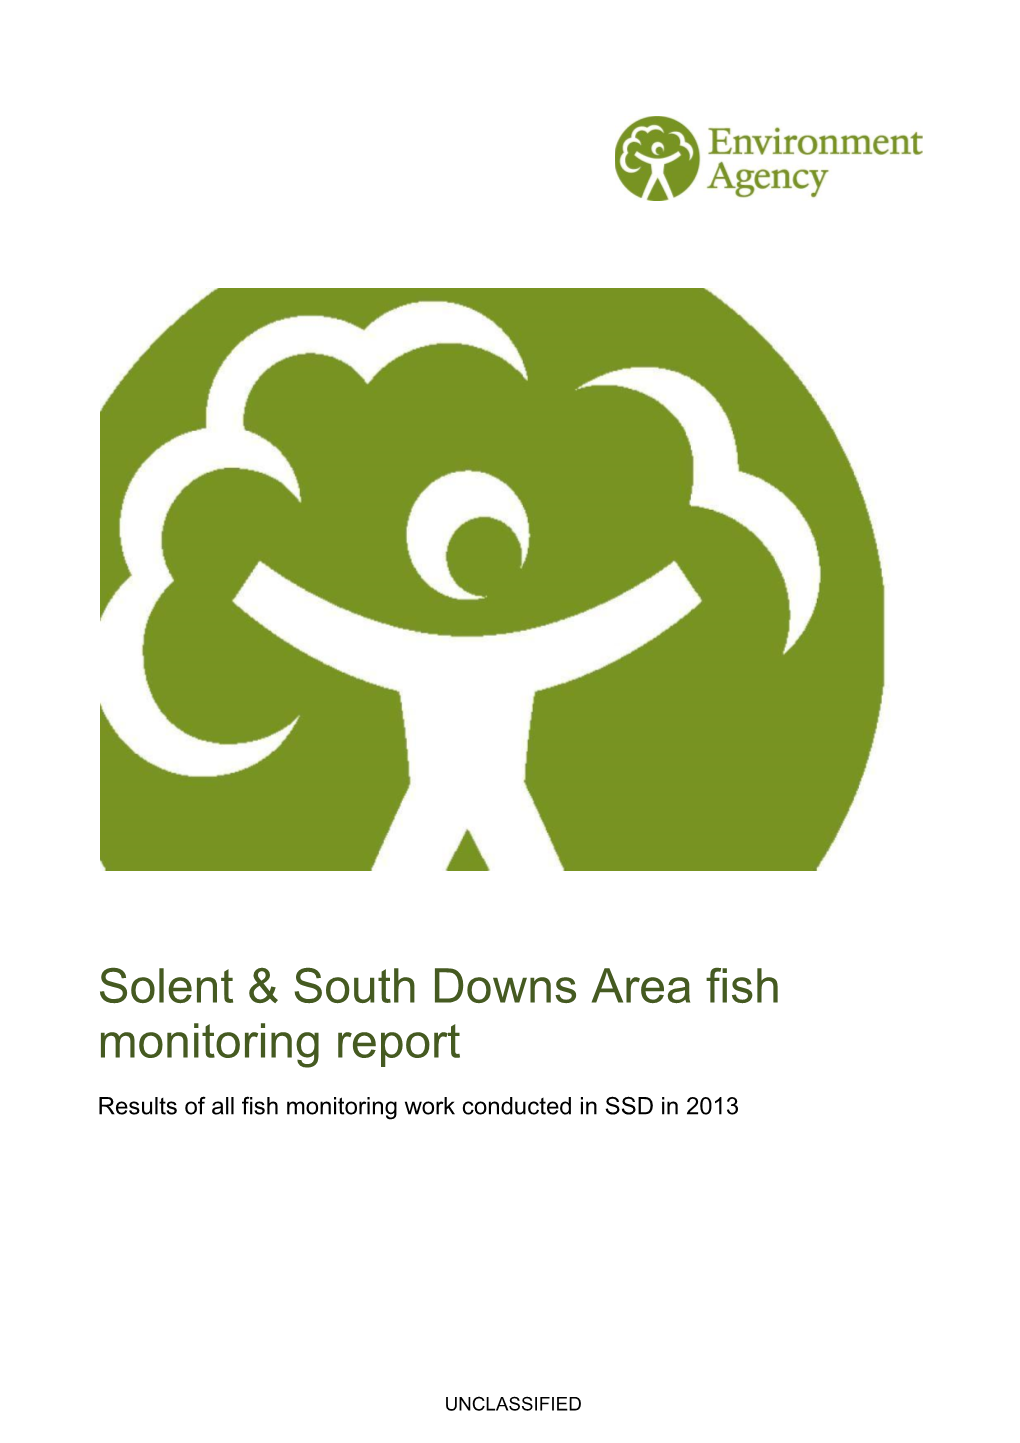 Solent & South Downs Area Fish Monitoring Report